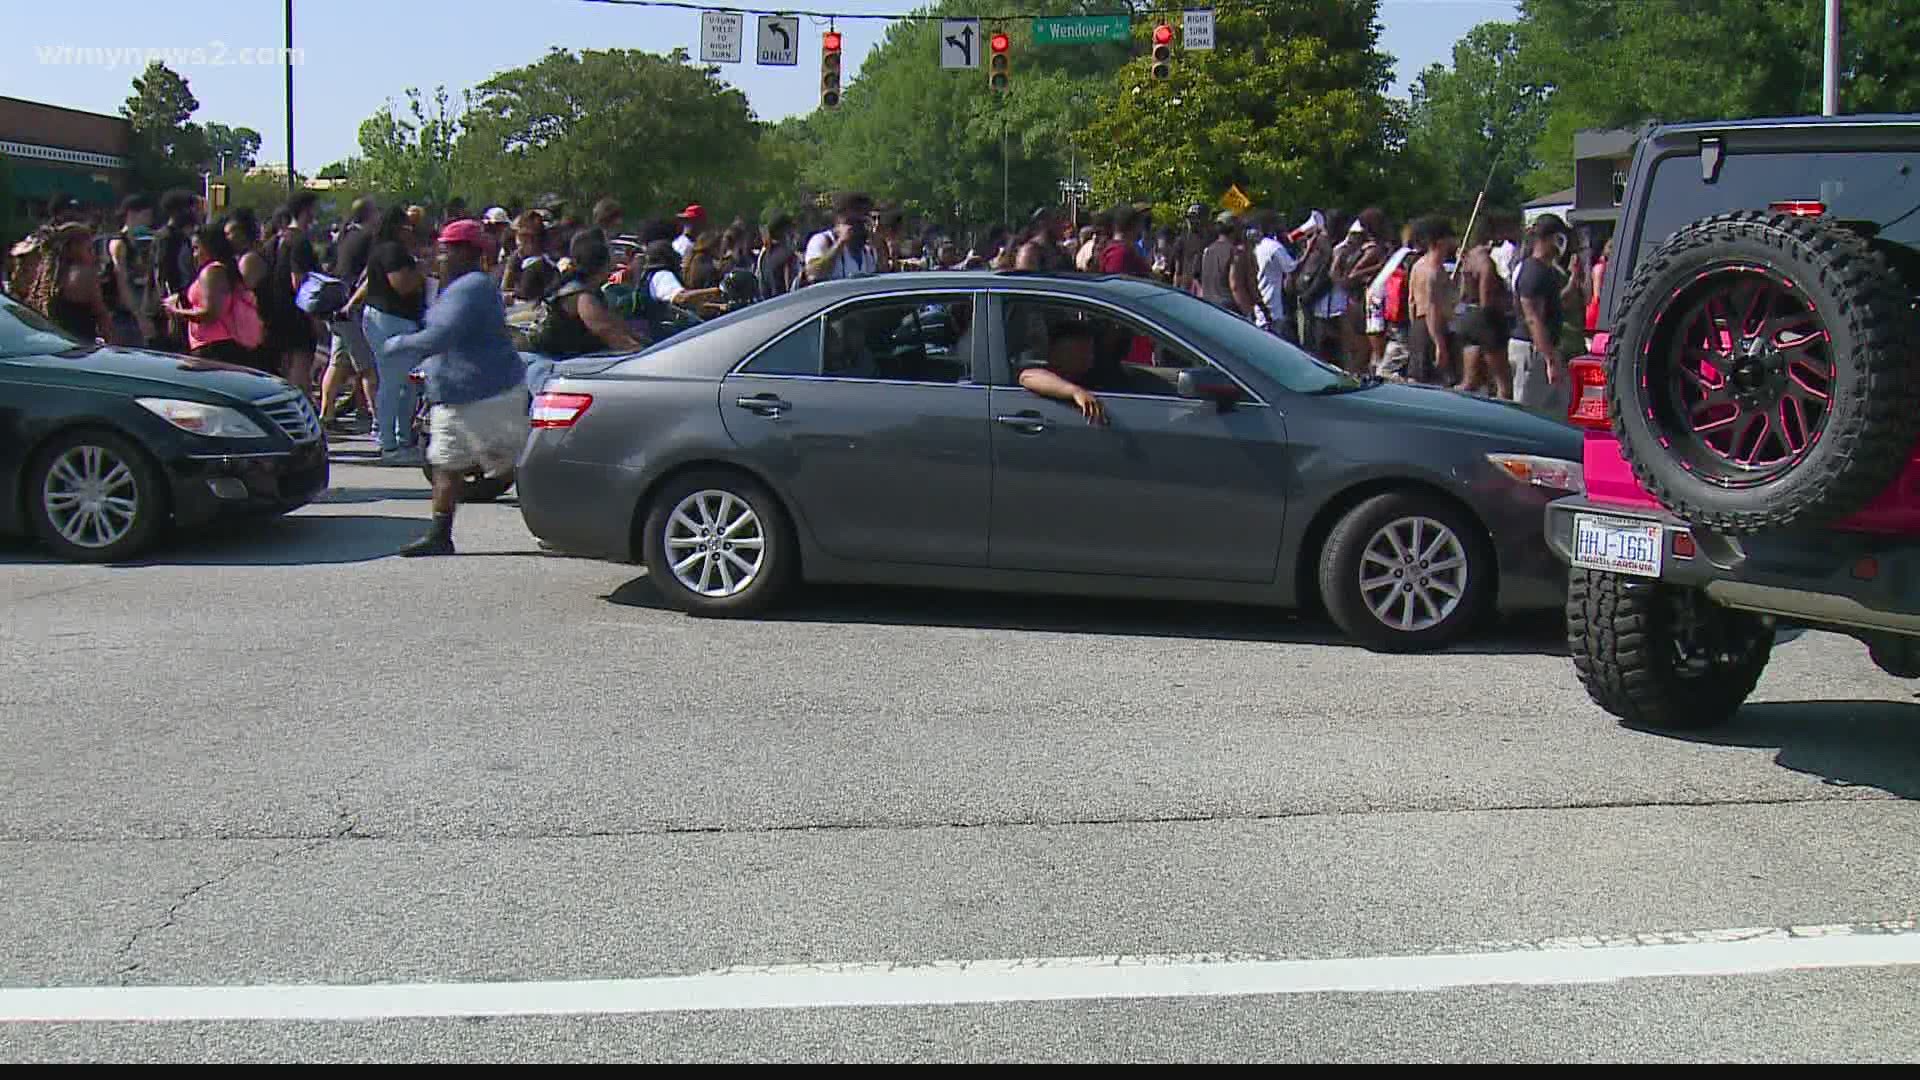 Parts of W. Wendover Avenue in Greensboro were shut down Sunday afternoon to accommodate a group of protesters.